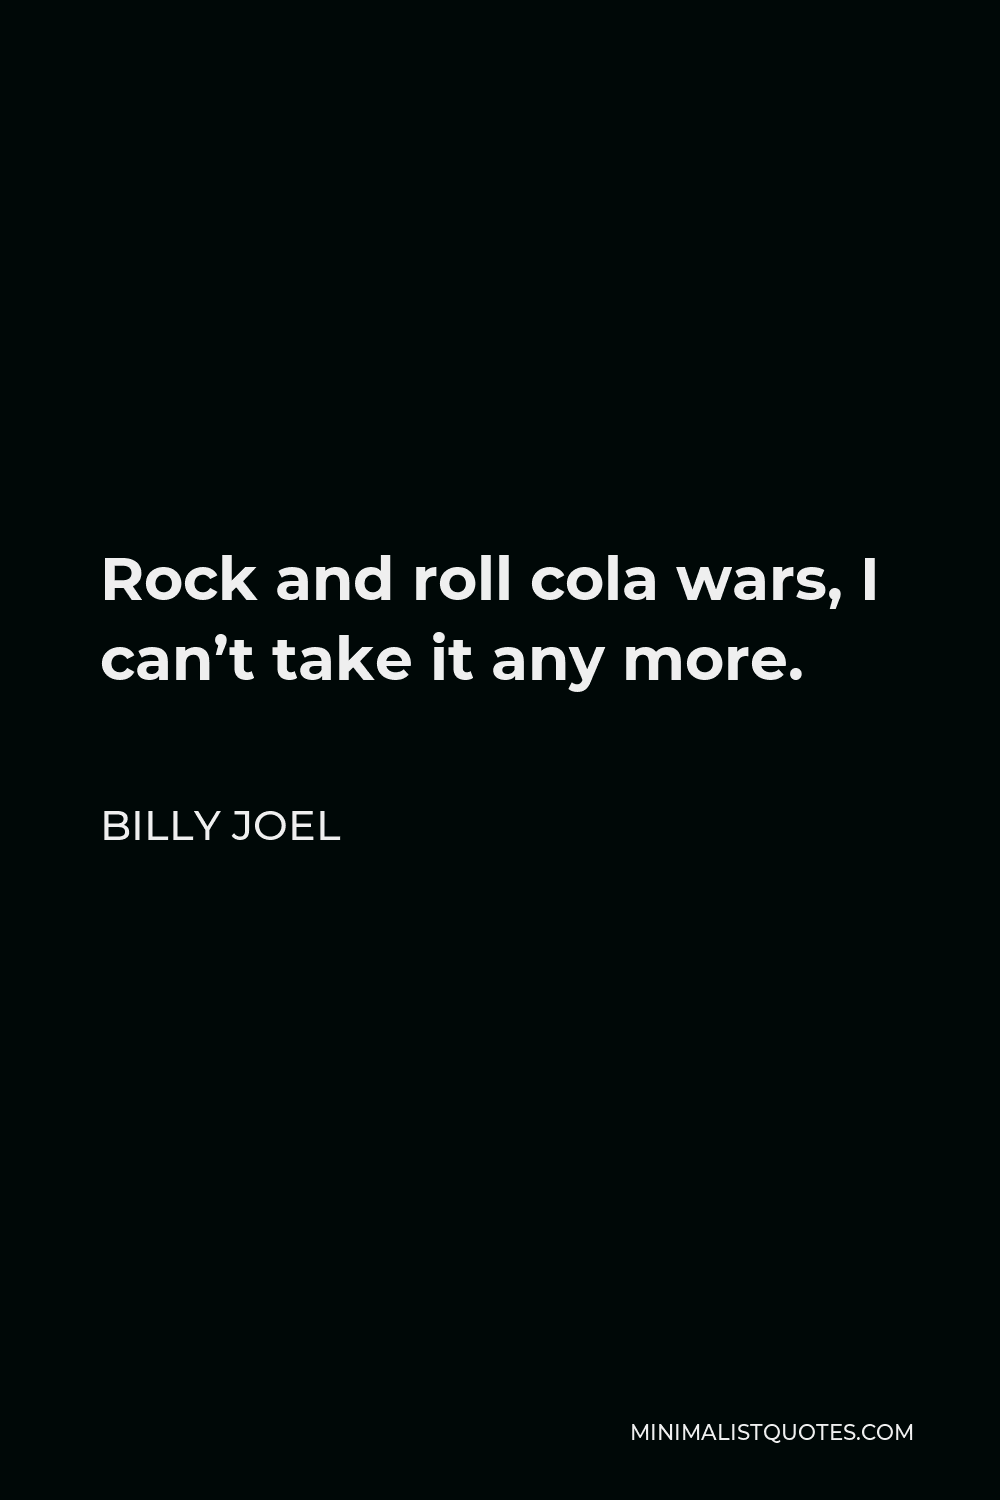 Billy Joel Quote - Rock and roll cola wars, I can’t take it any more.